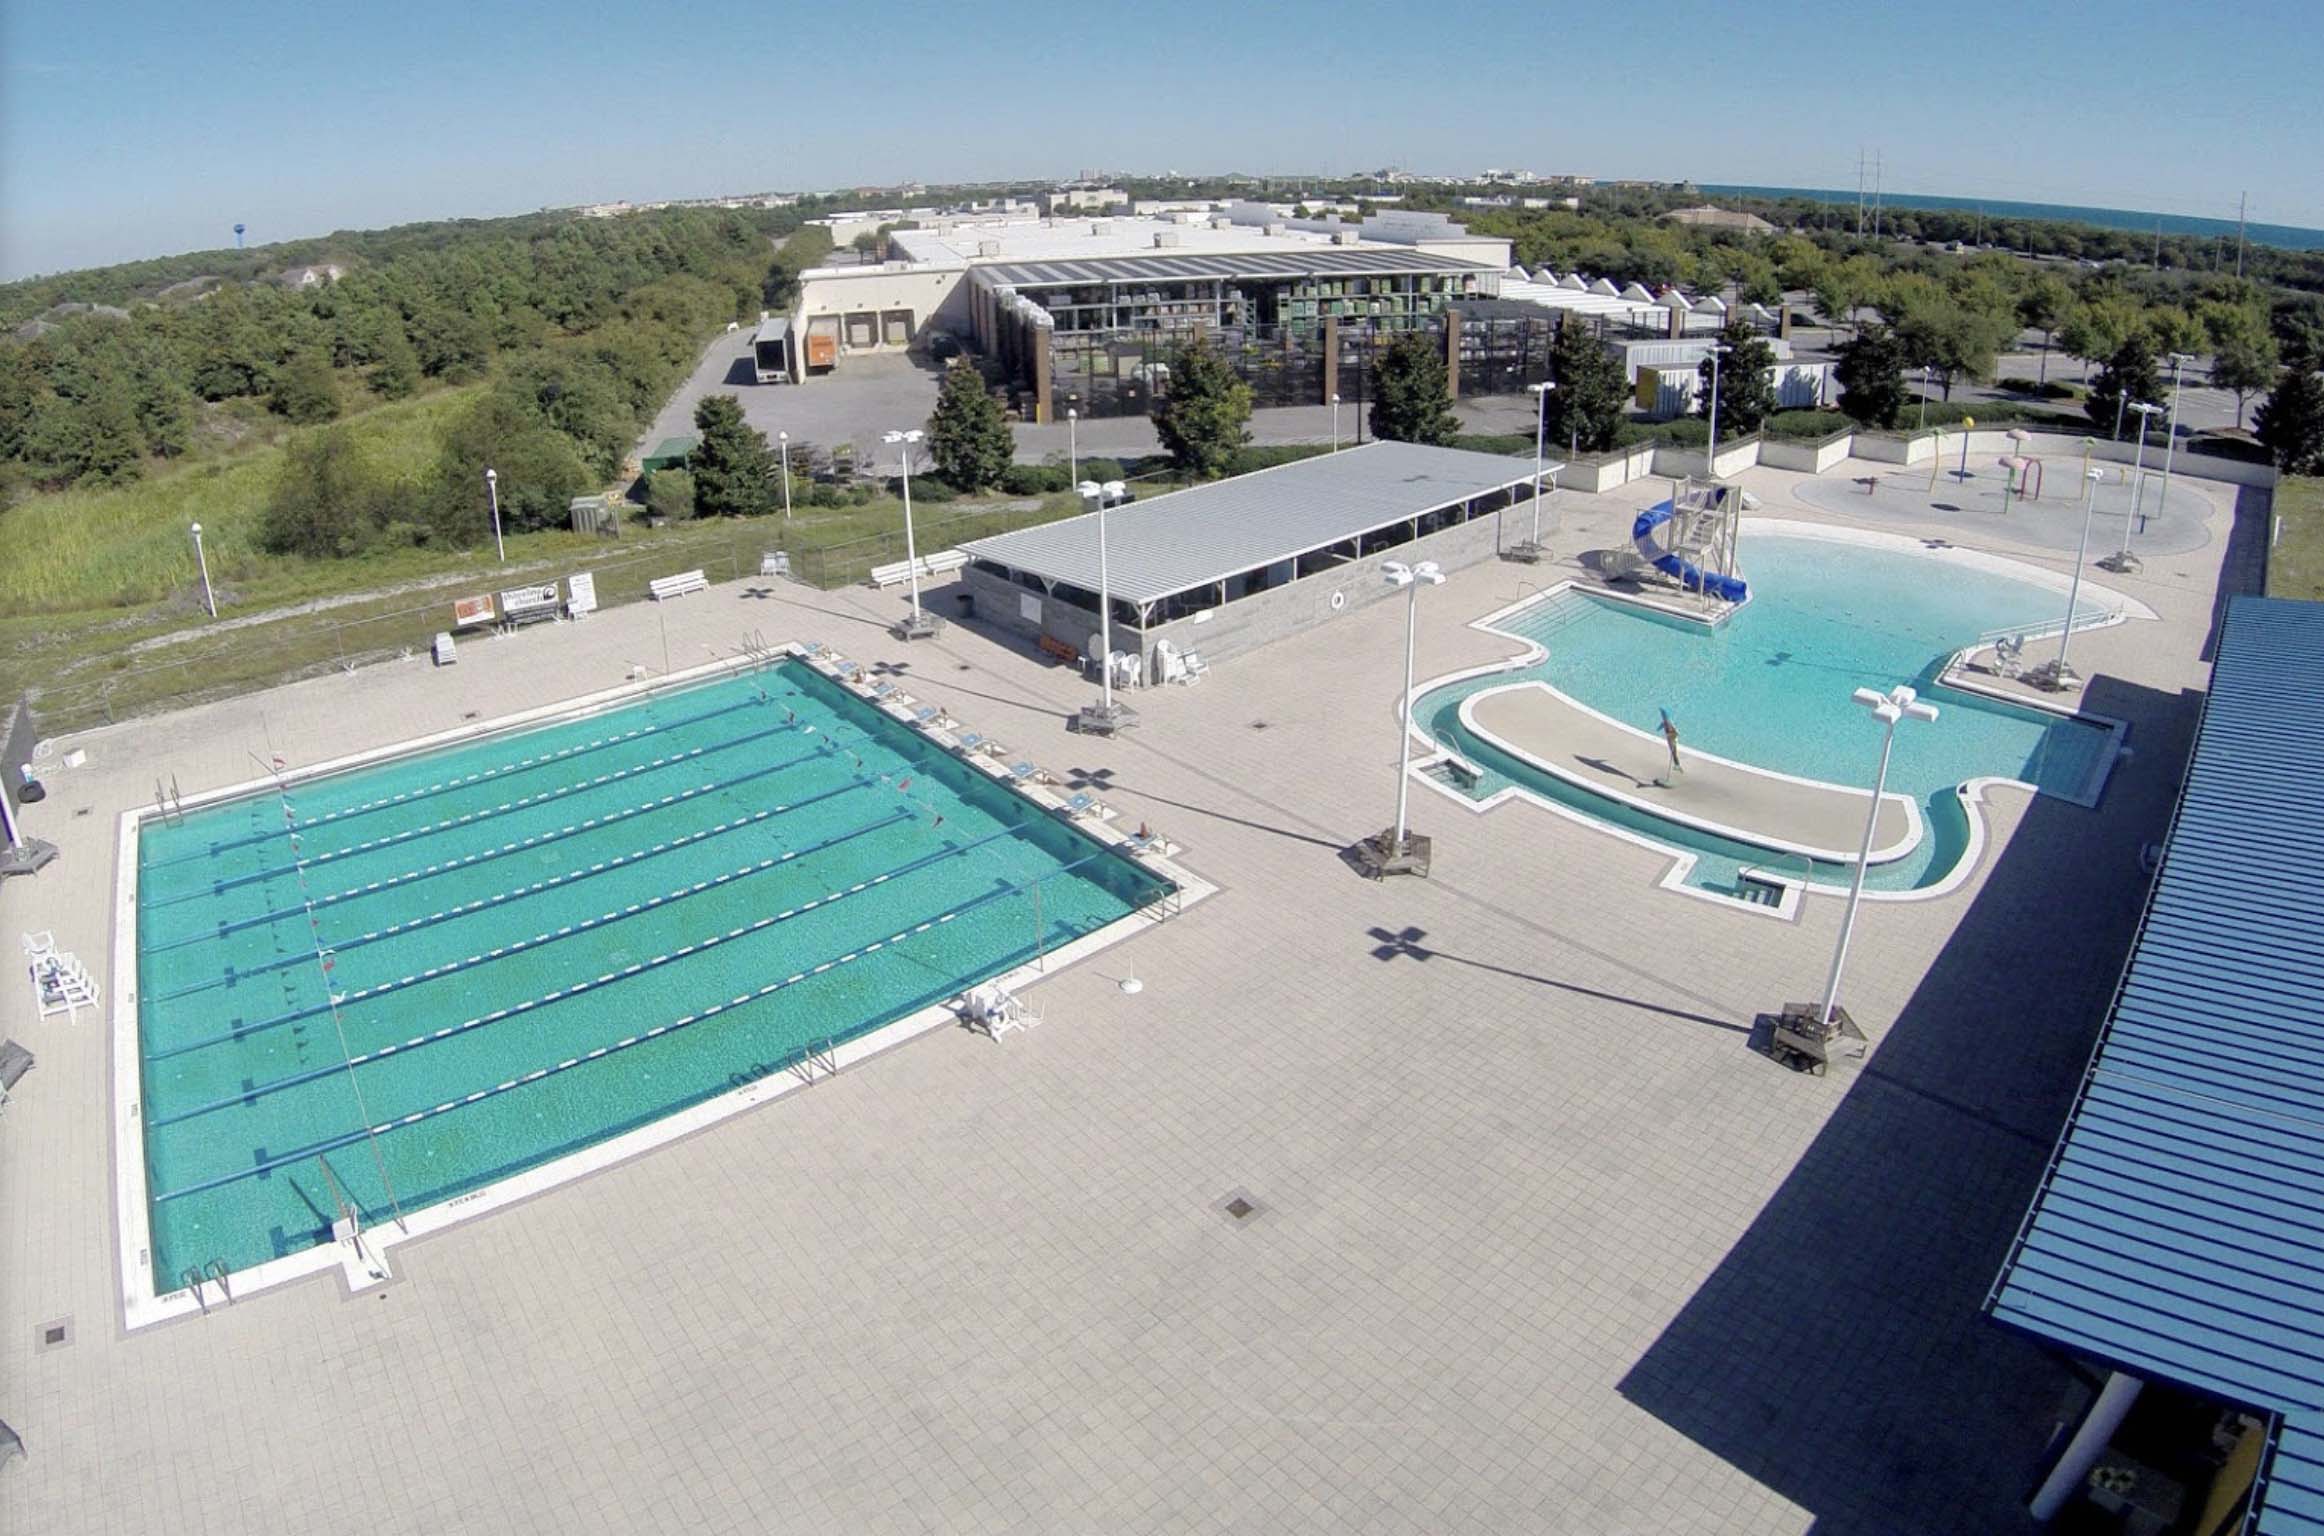 arial photo of 2 outdoor inground pools . One pool has swimming lane separators and the other pool is a round shape with a blue slide.